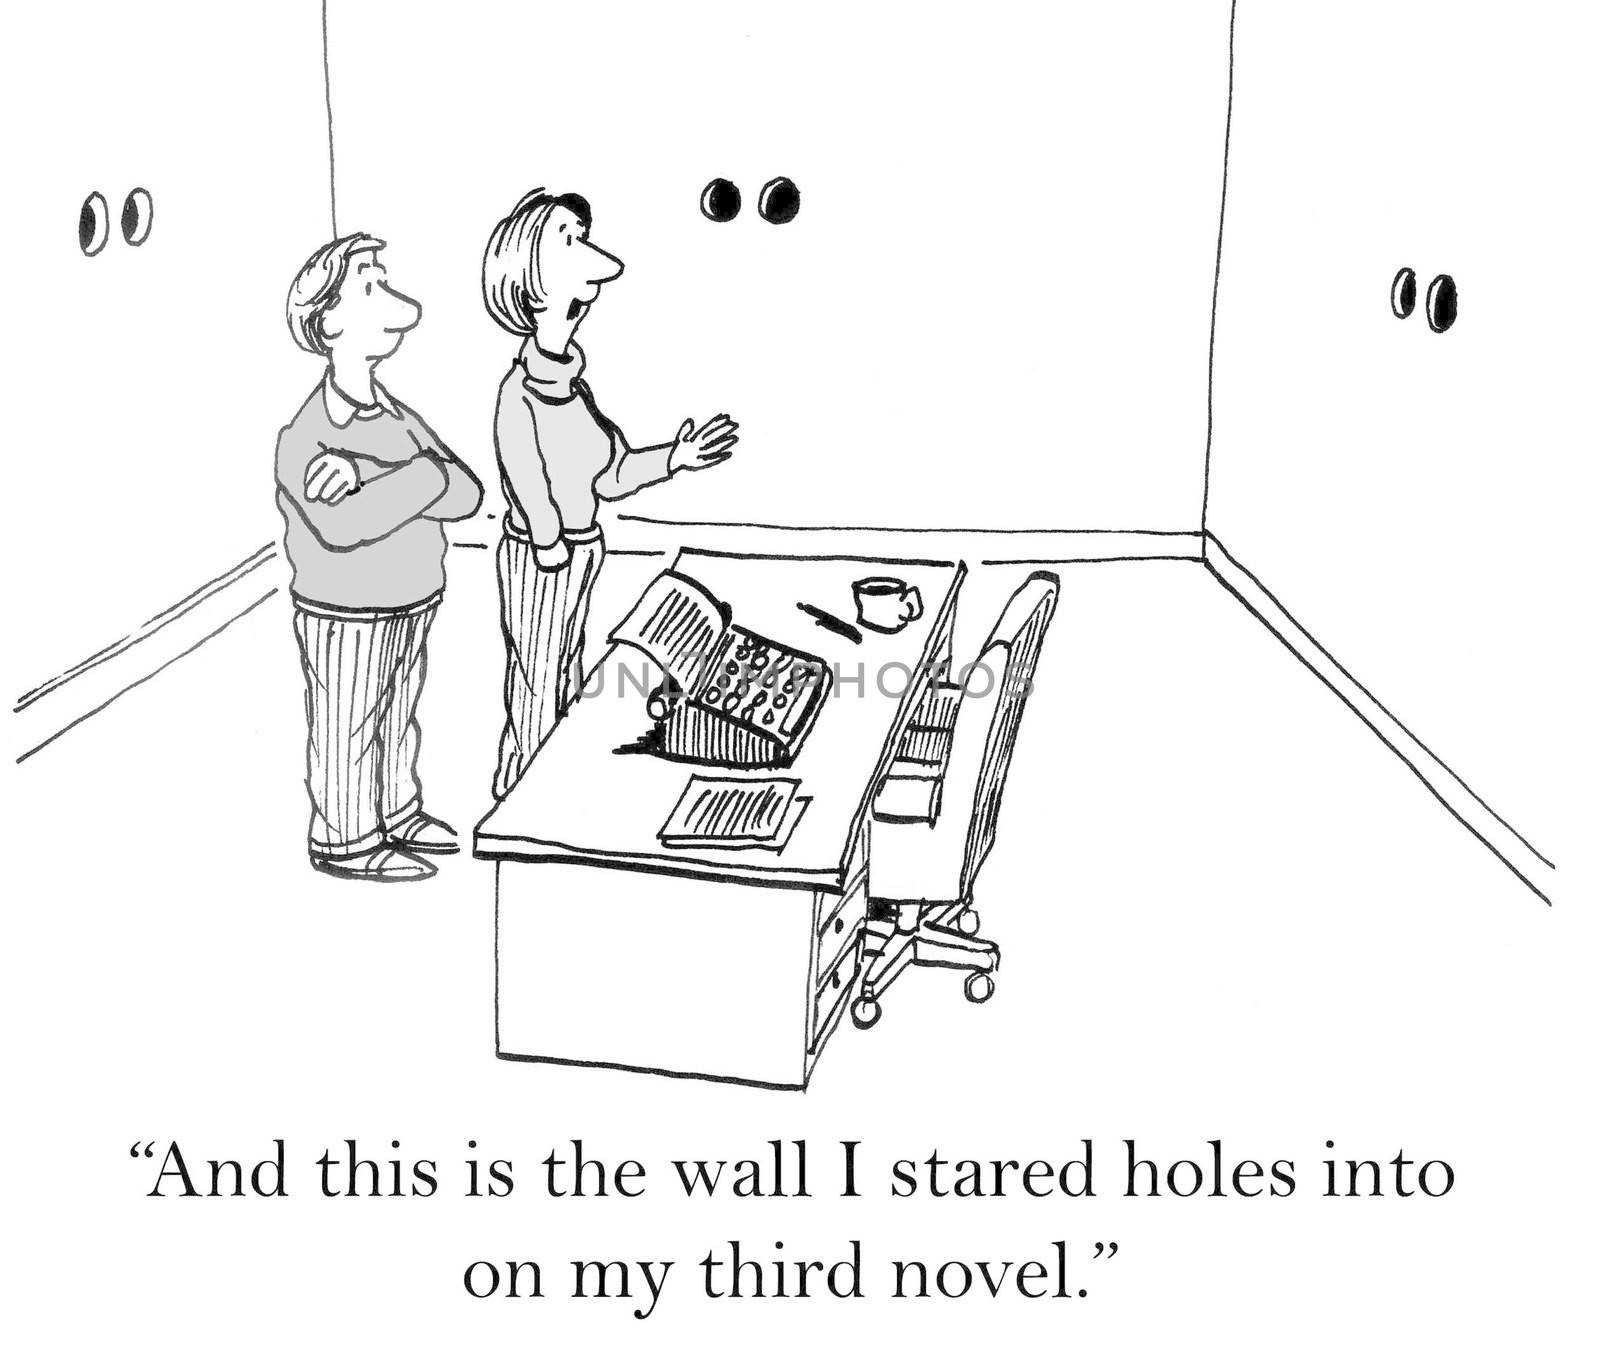 "And this is the wall I stared holes into on my third novel."